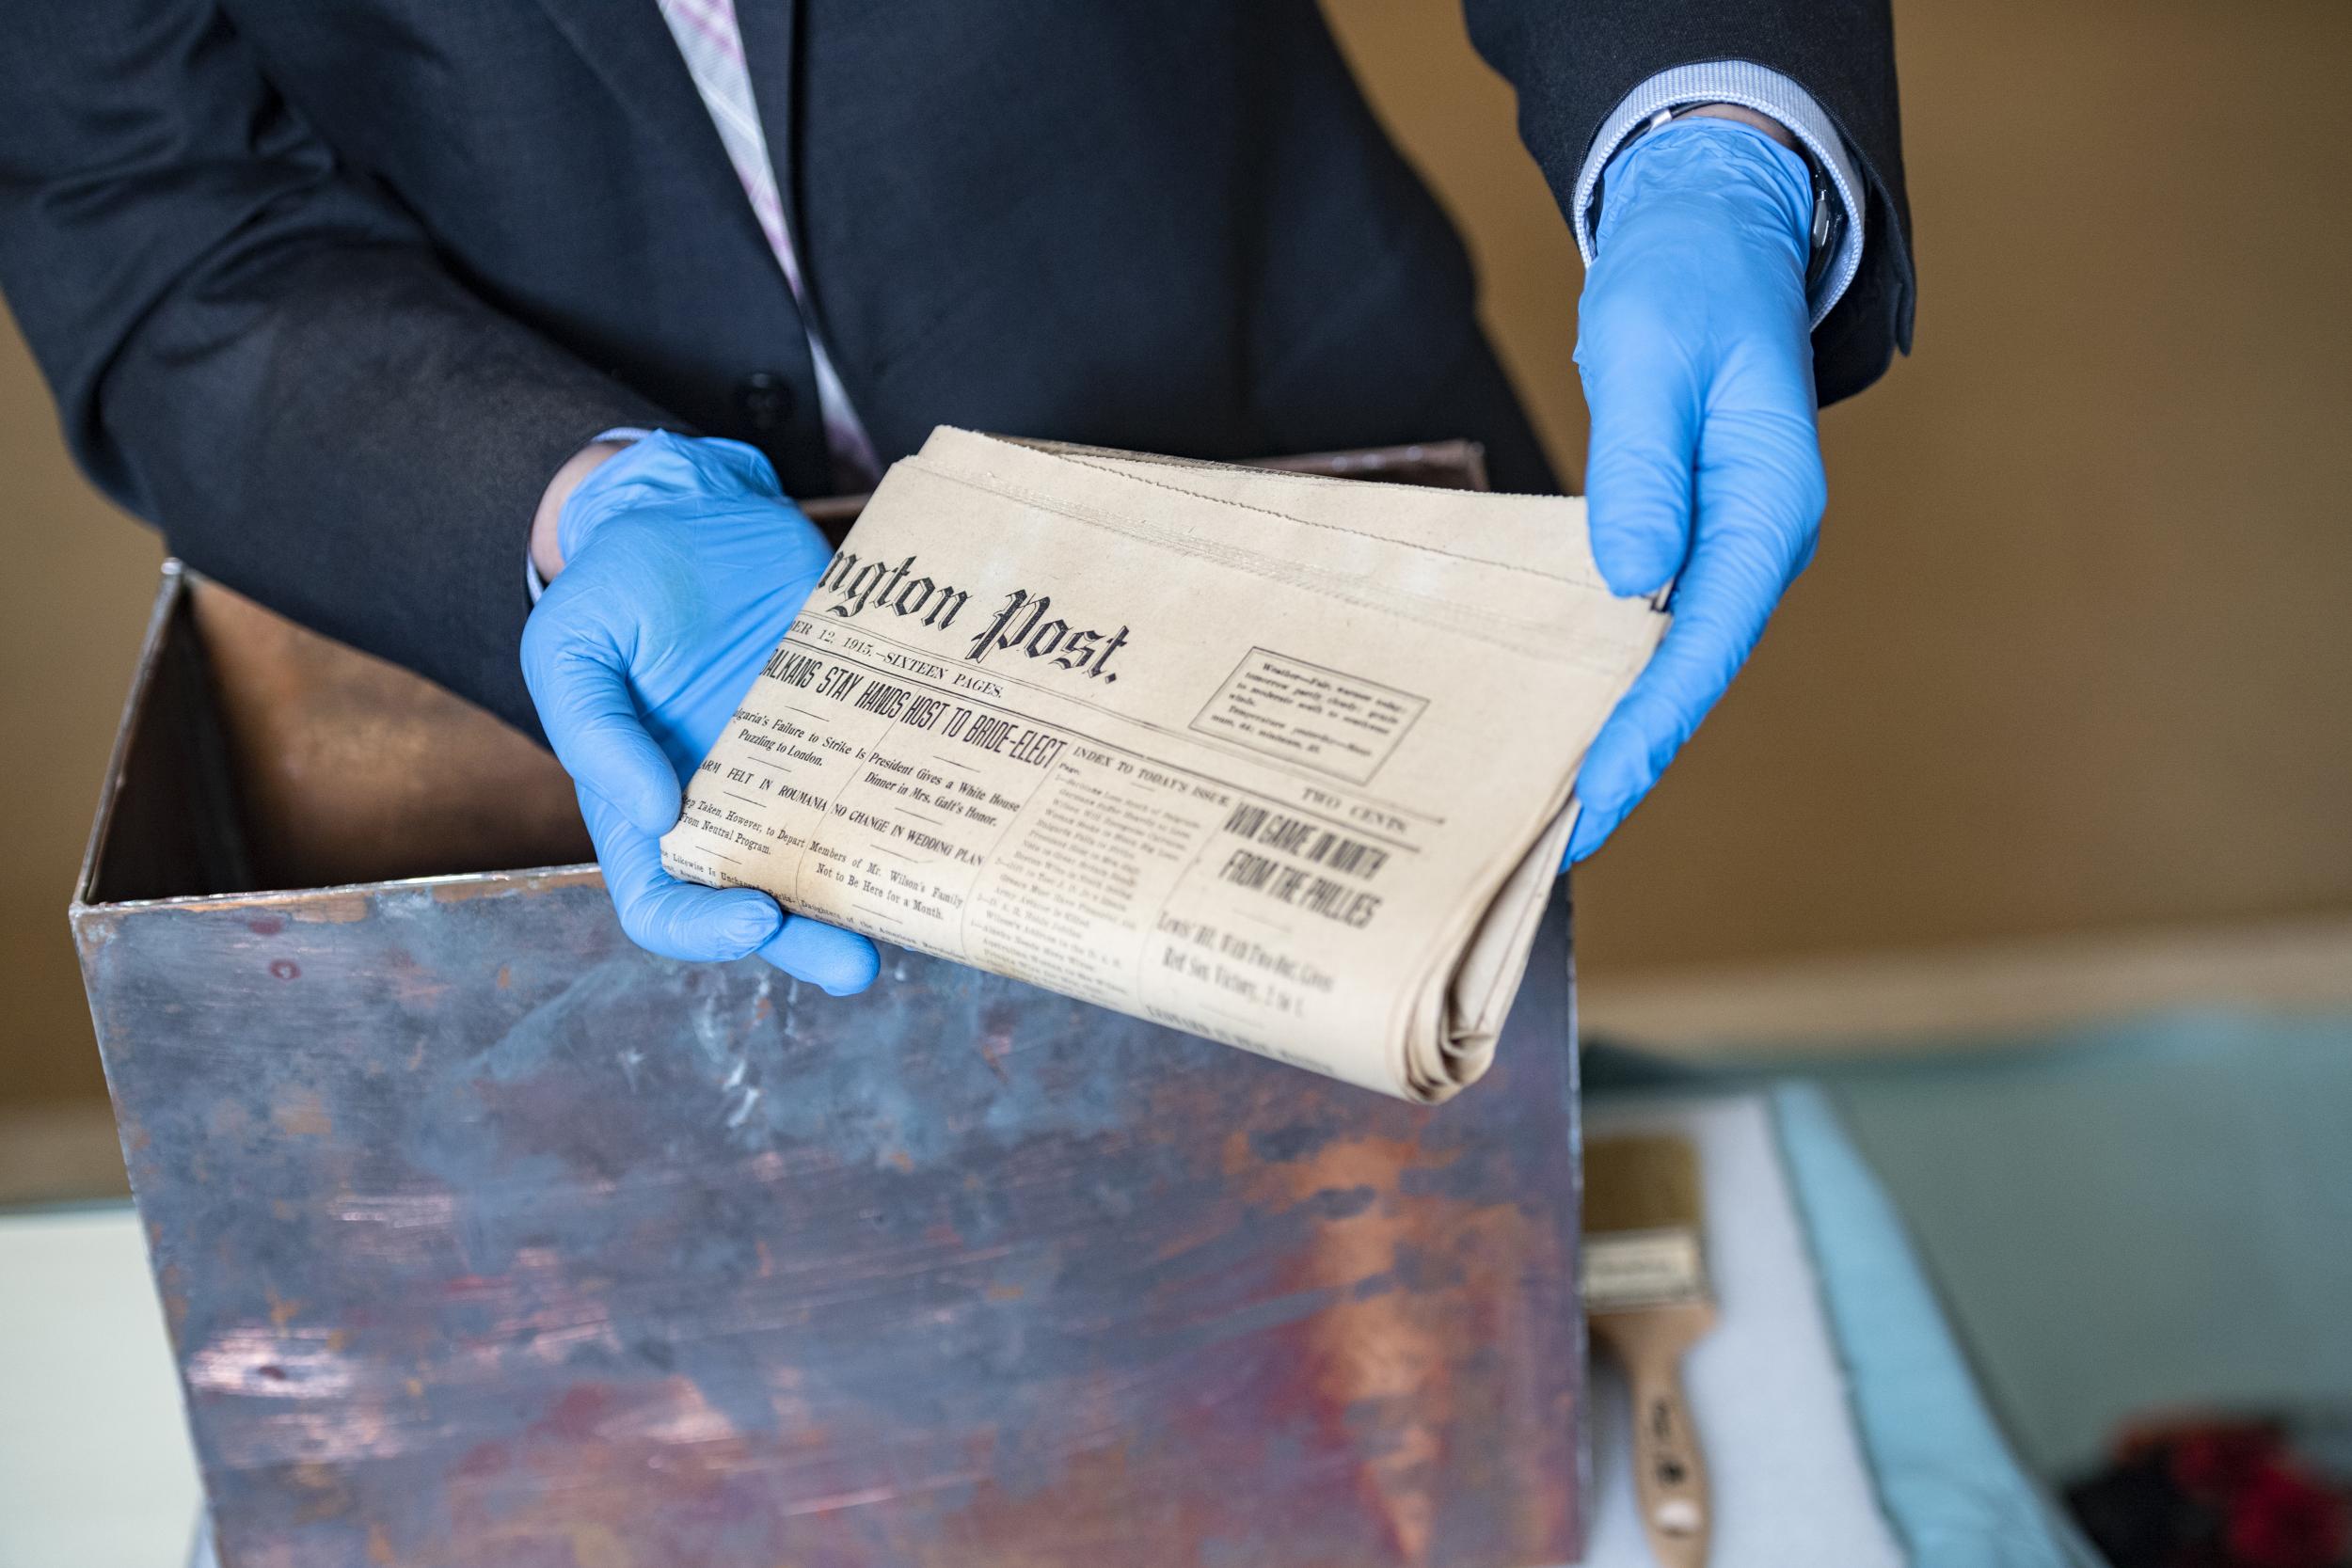 A ‘Washington Post’ newspaper dated 12 October 1915 is removed from the time capsule